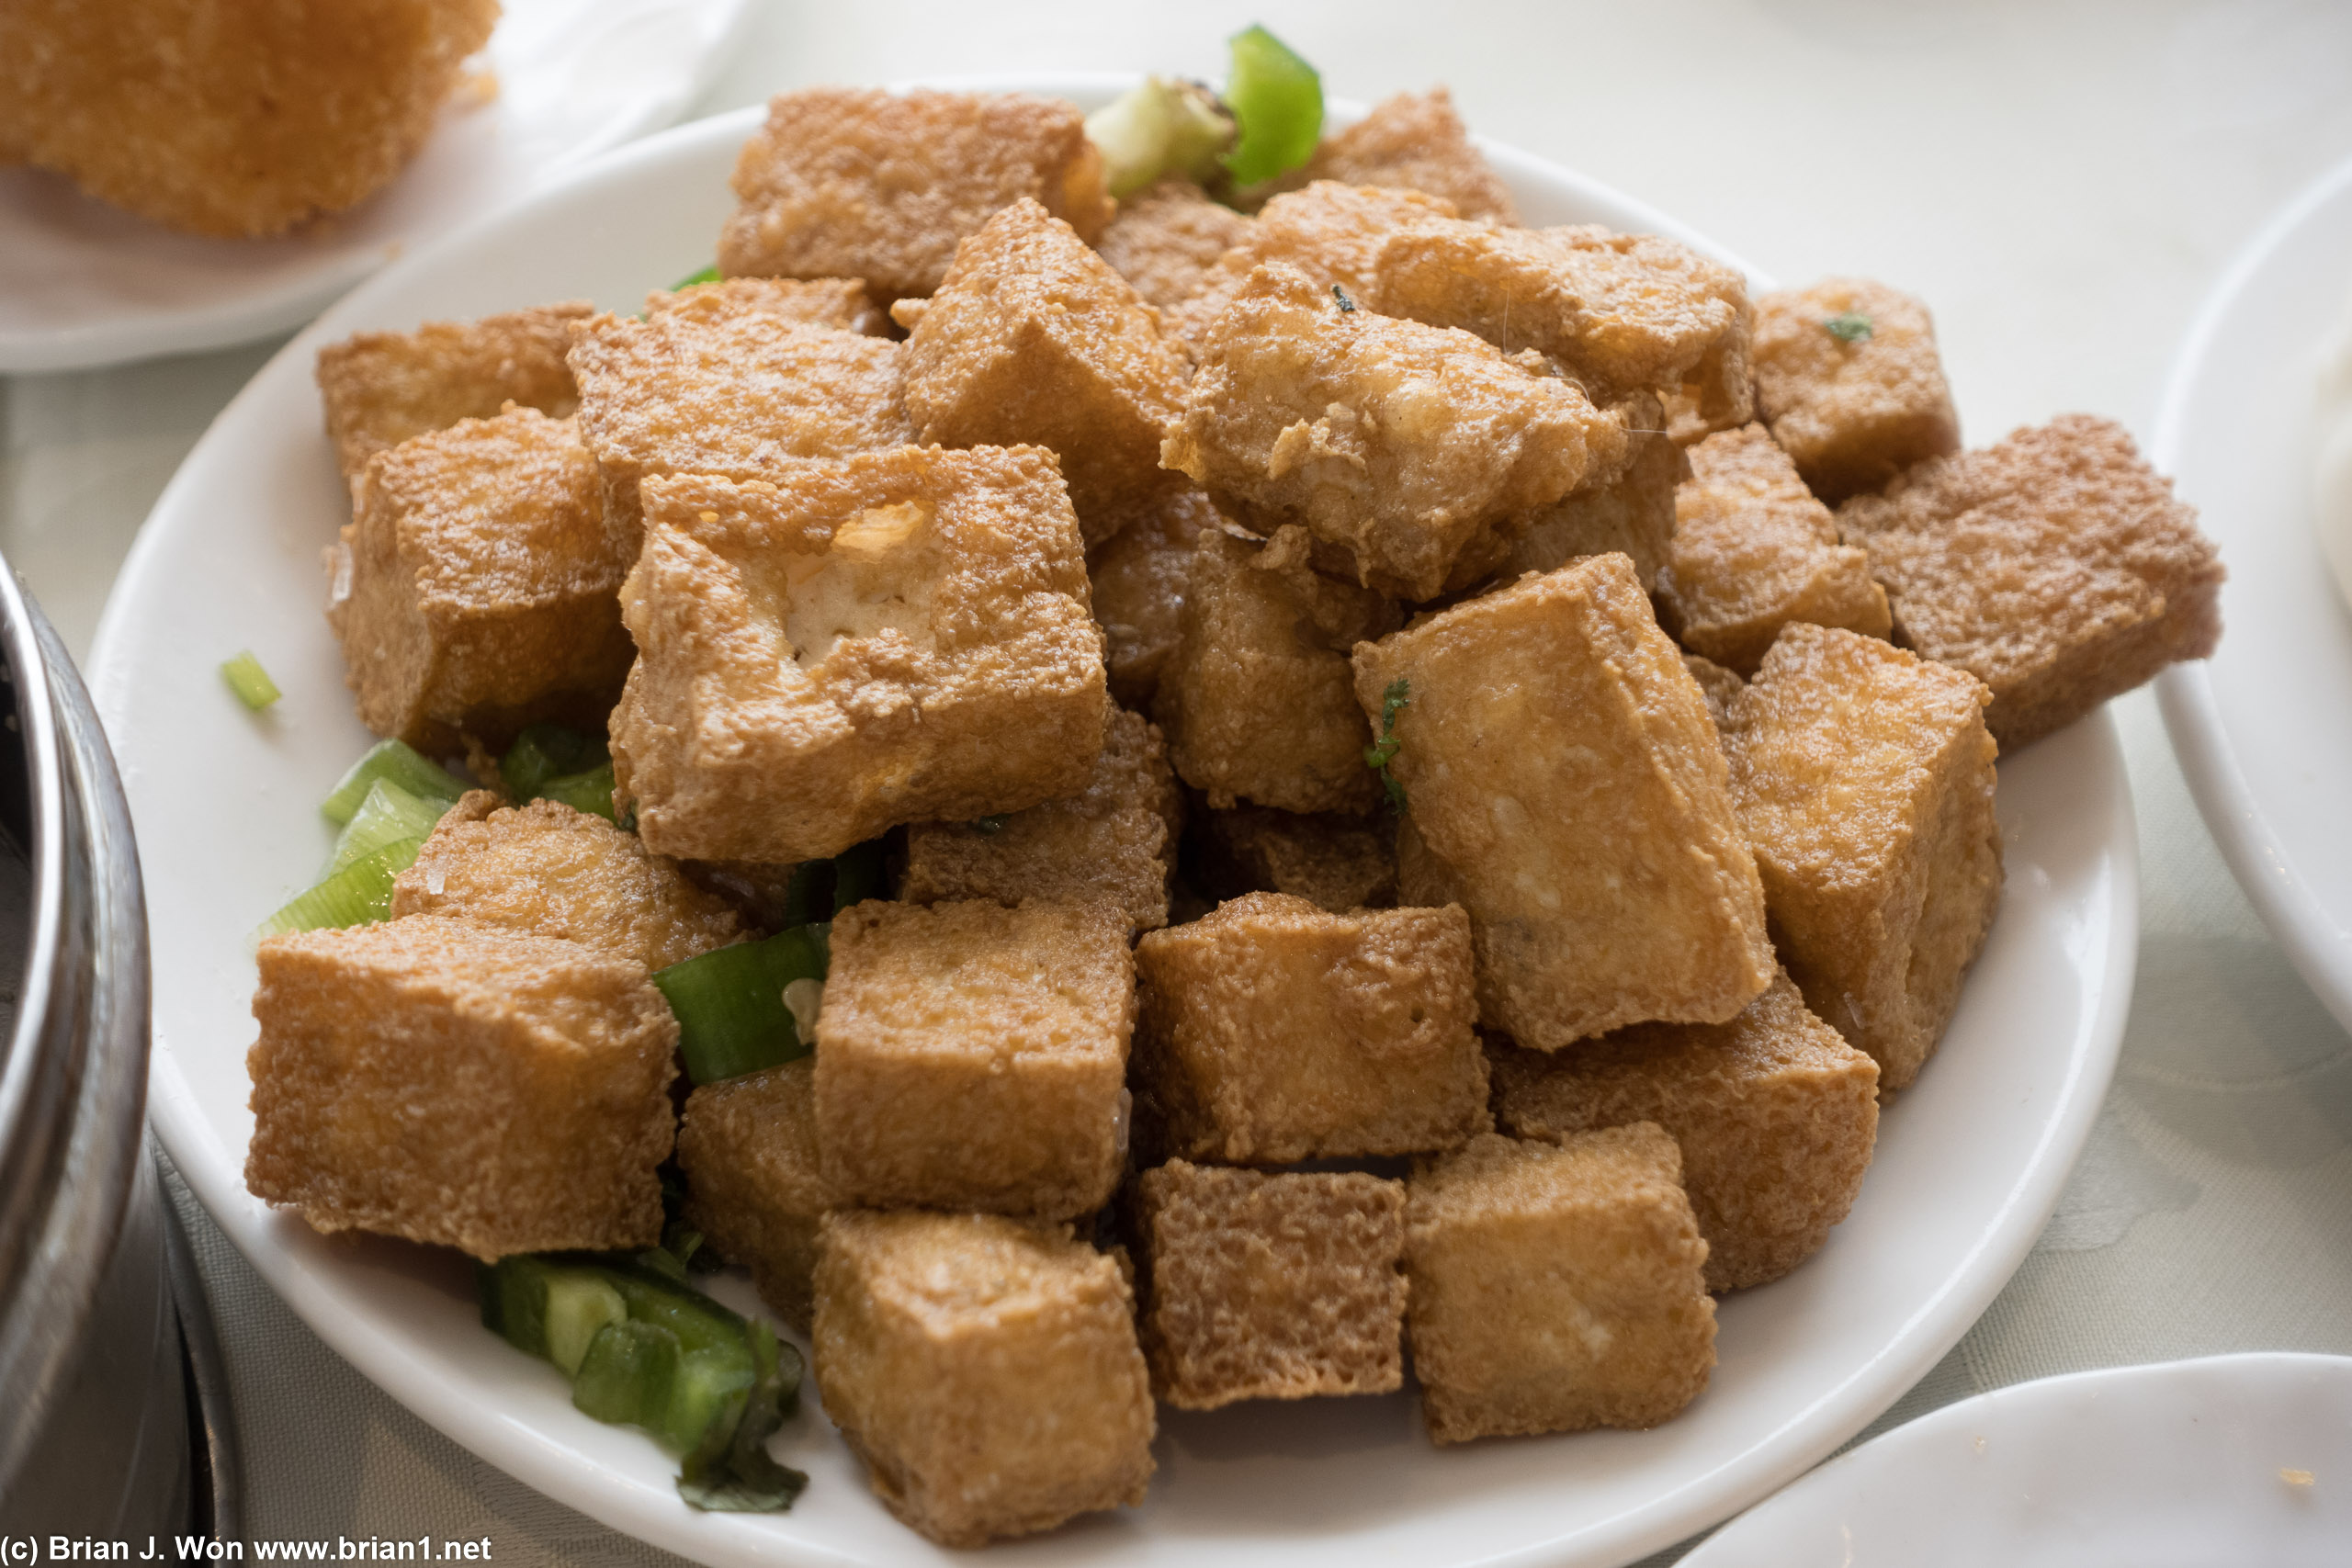 Deep fried tofu was so deep fried it was almost missing the tofu.